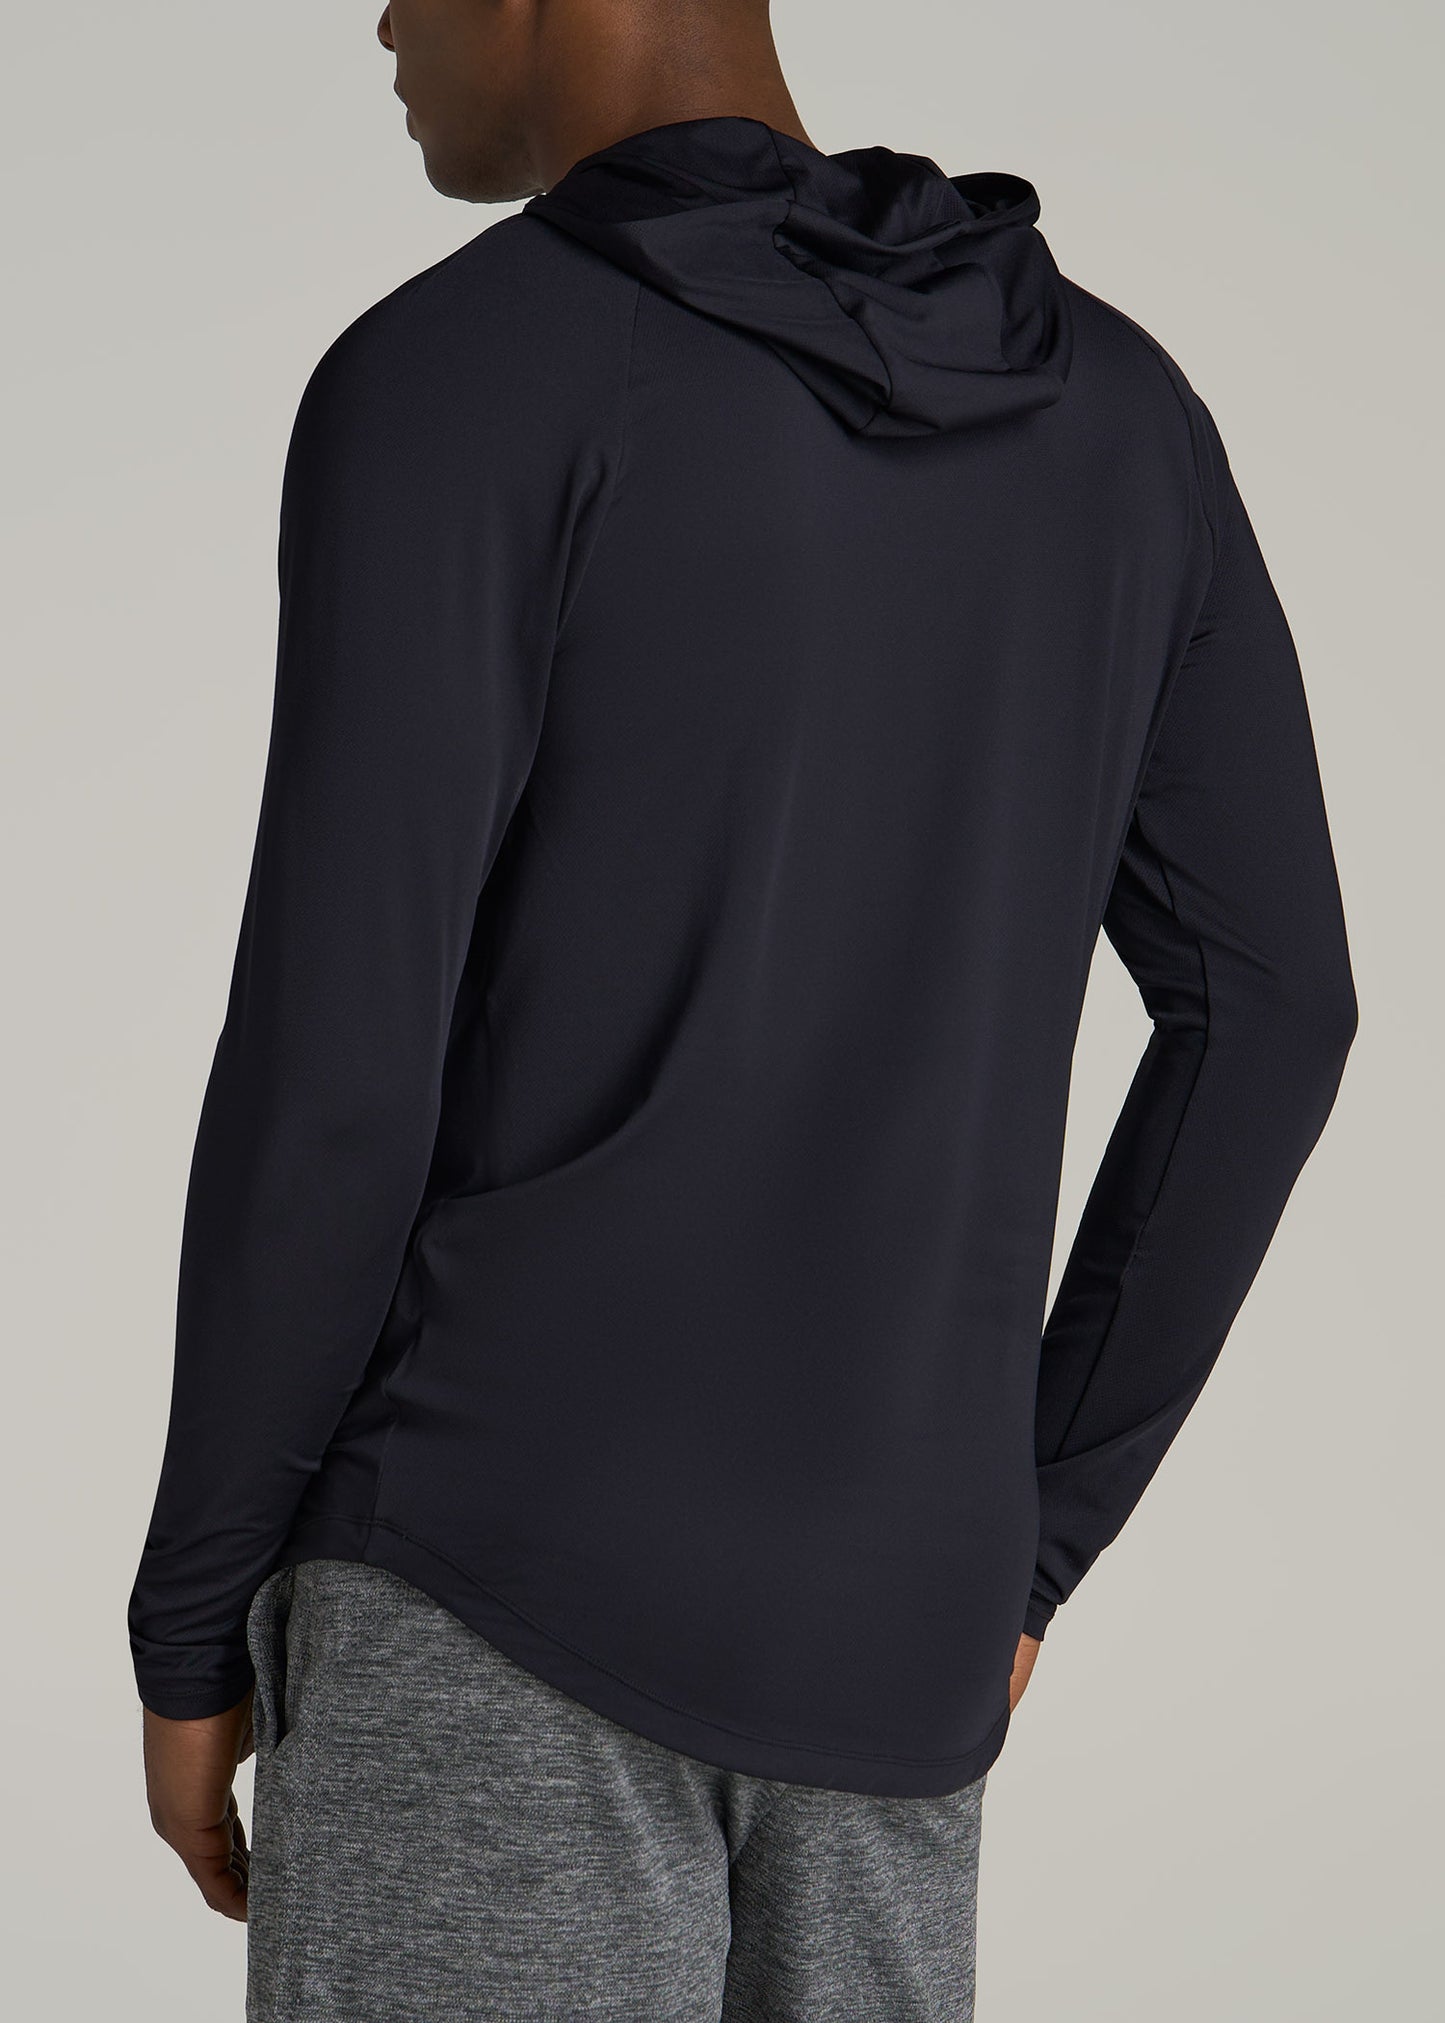 Men's A.T. Performance Training Tall Hoodie in Black